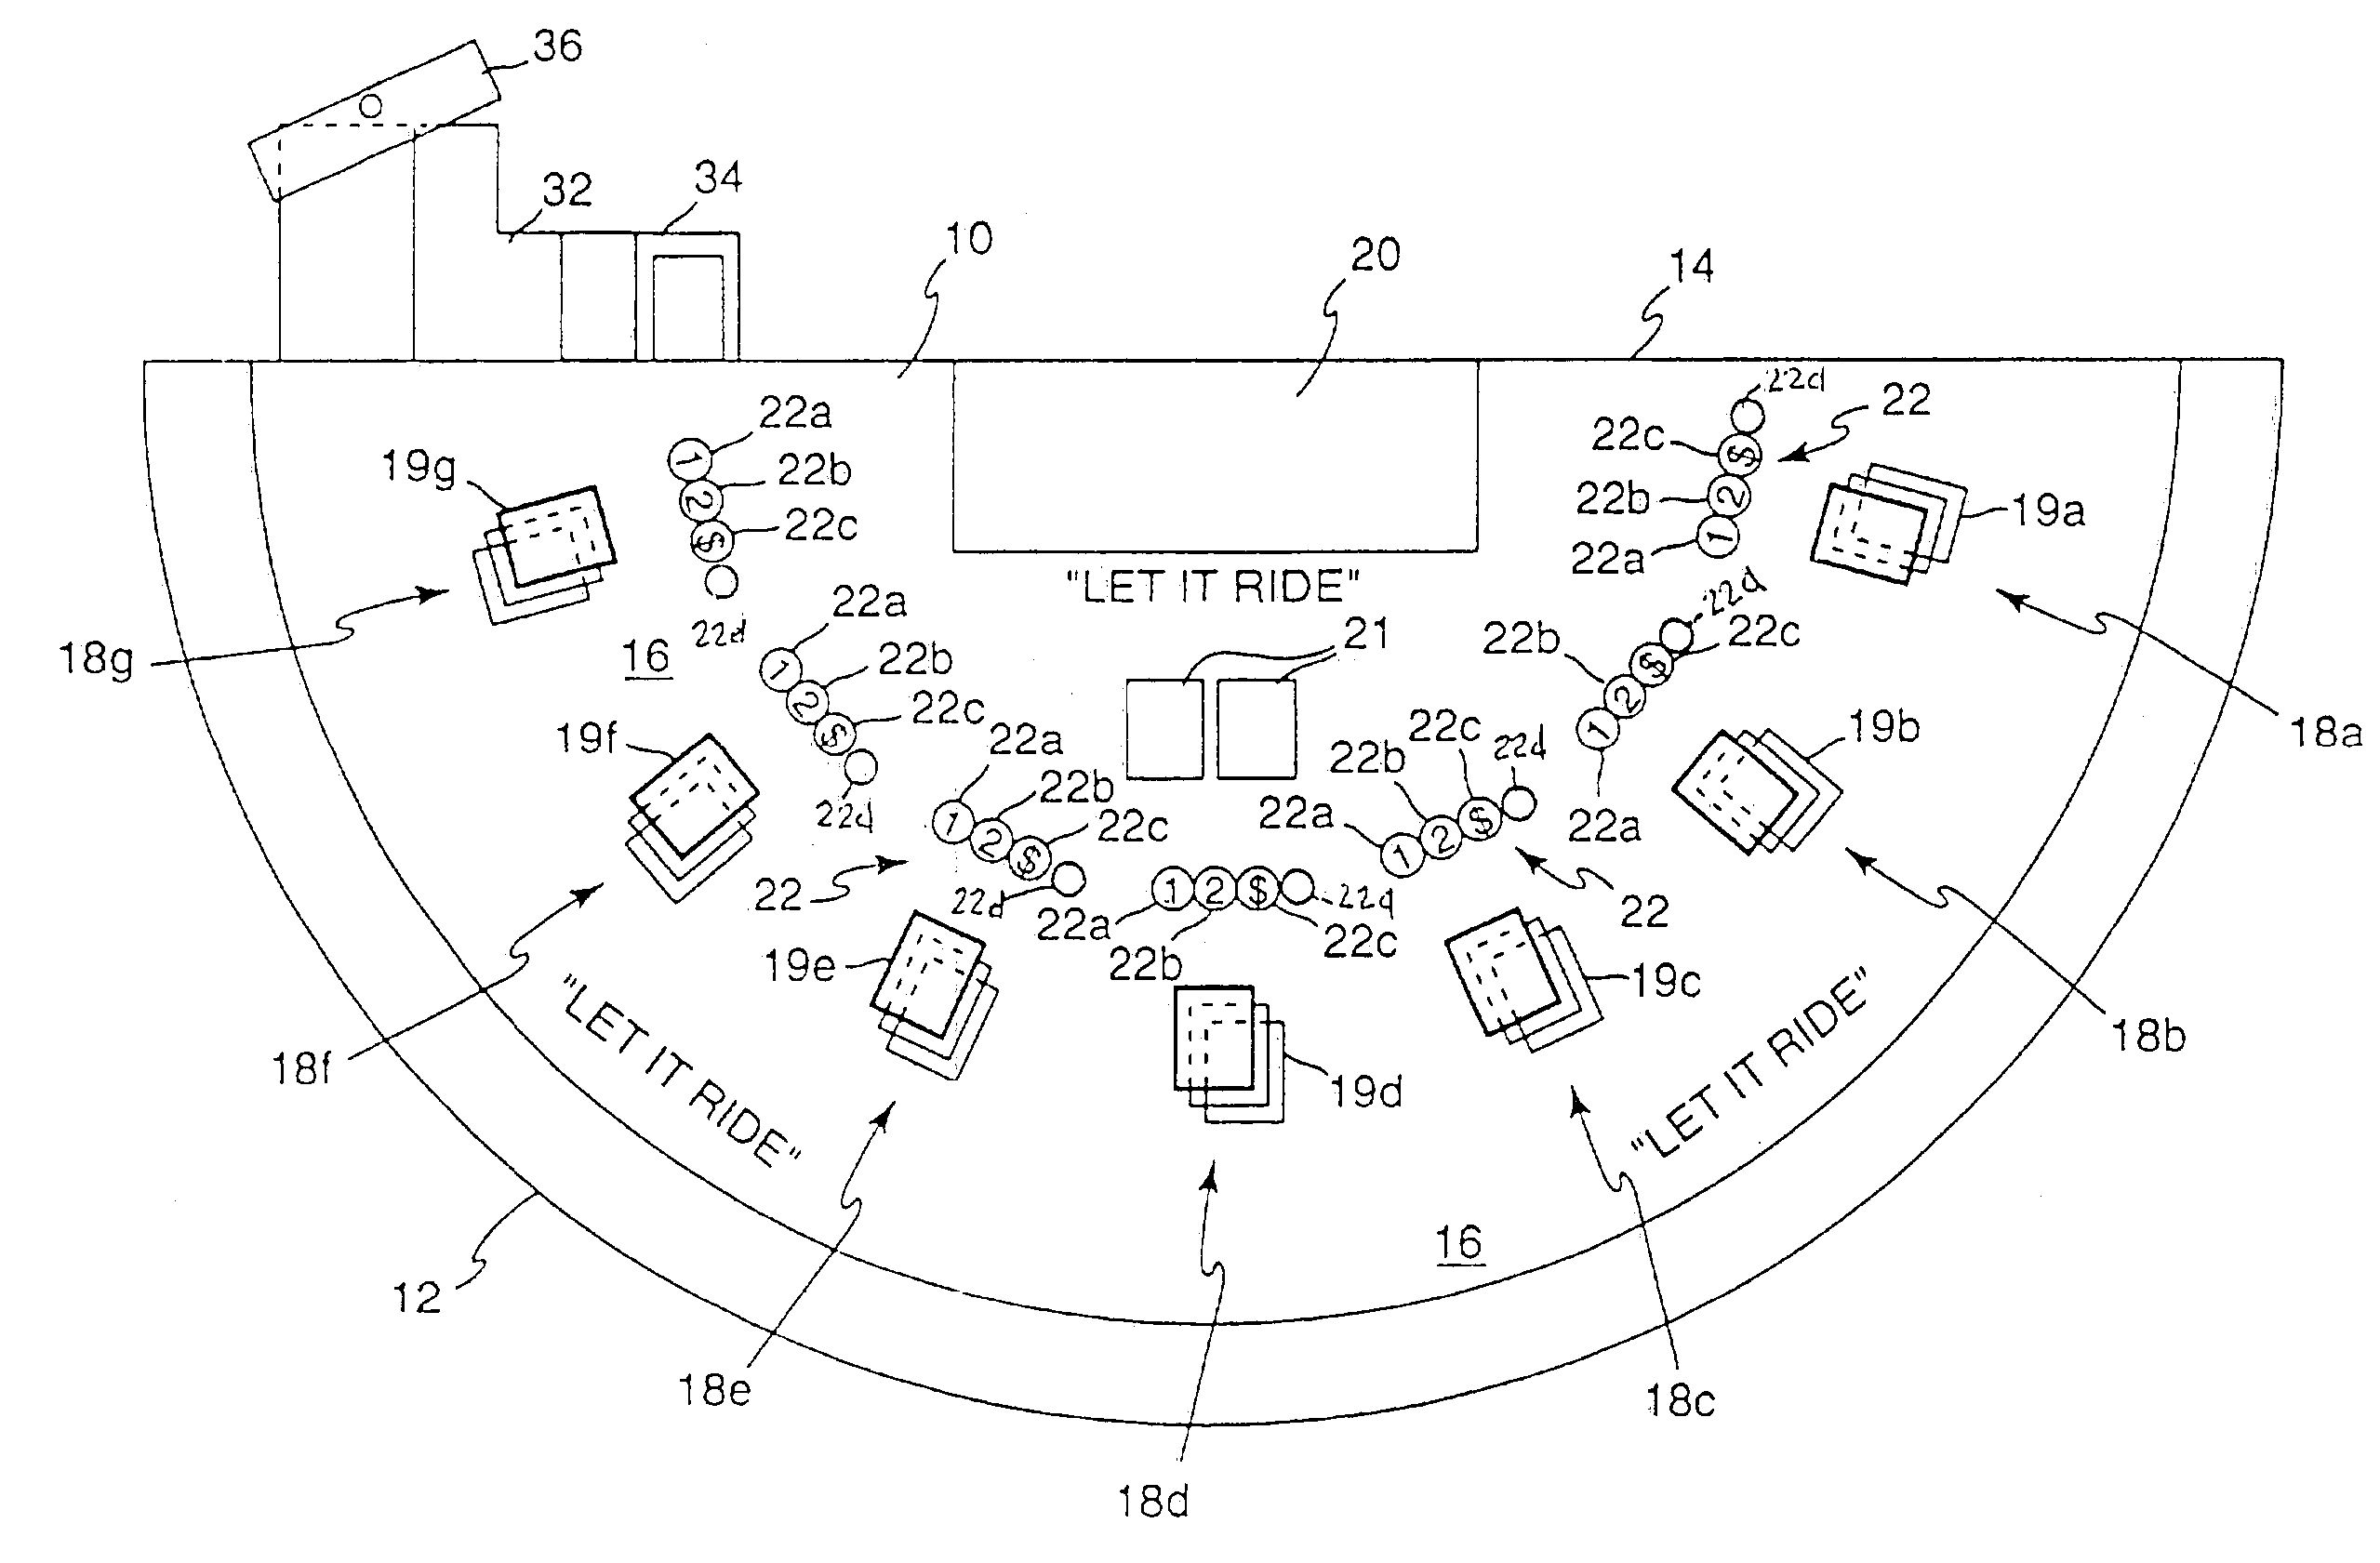 Method of playing a poker-type wagering game with multiple betting options